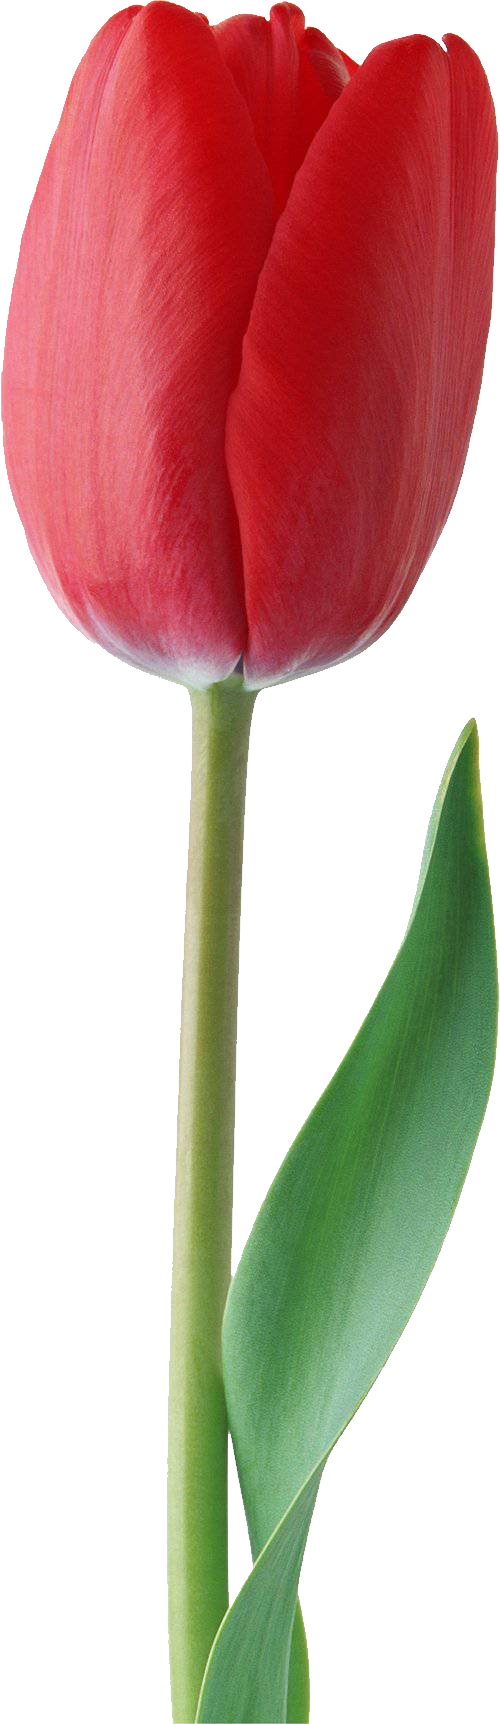 Red Tulip Png Image - Tulip, Transparent background PNG HD thumbnail